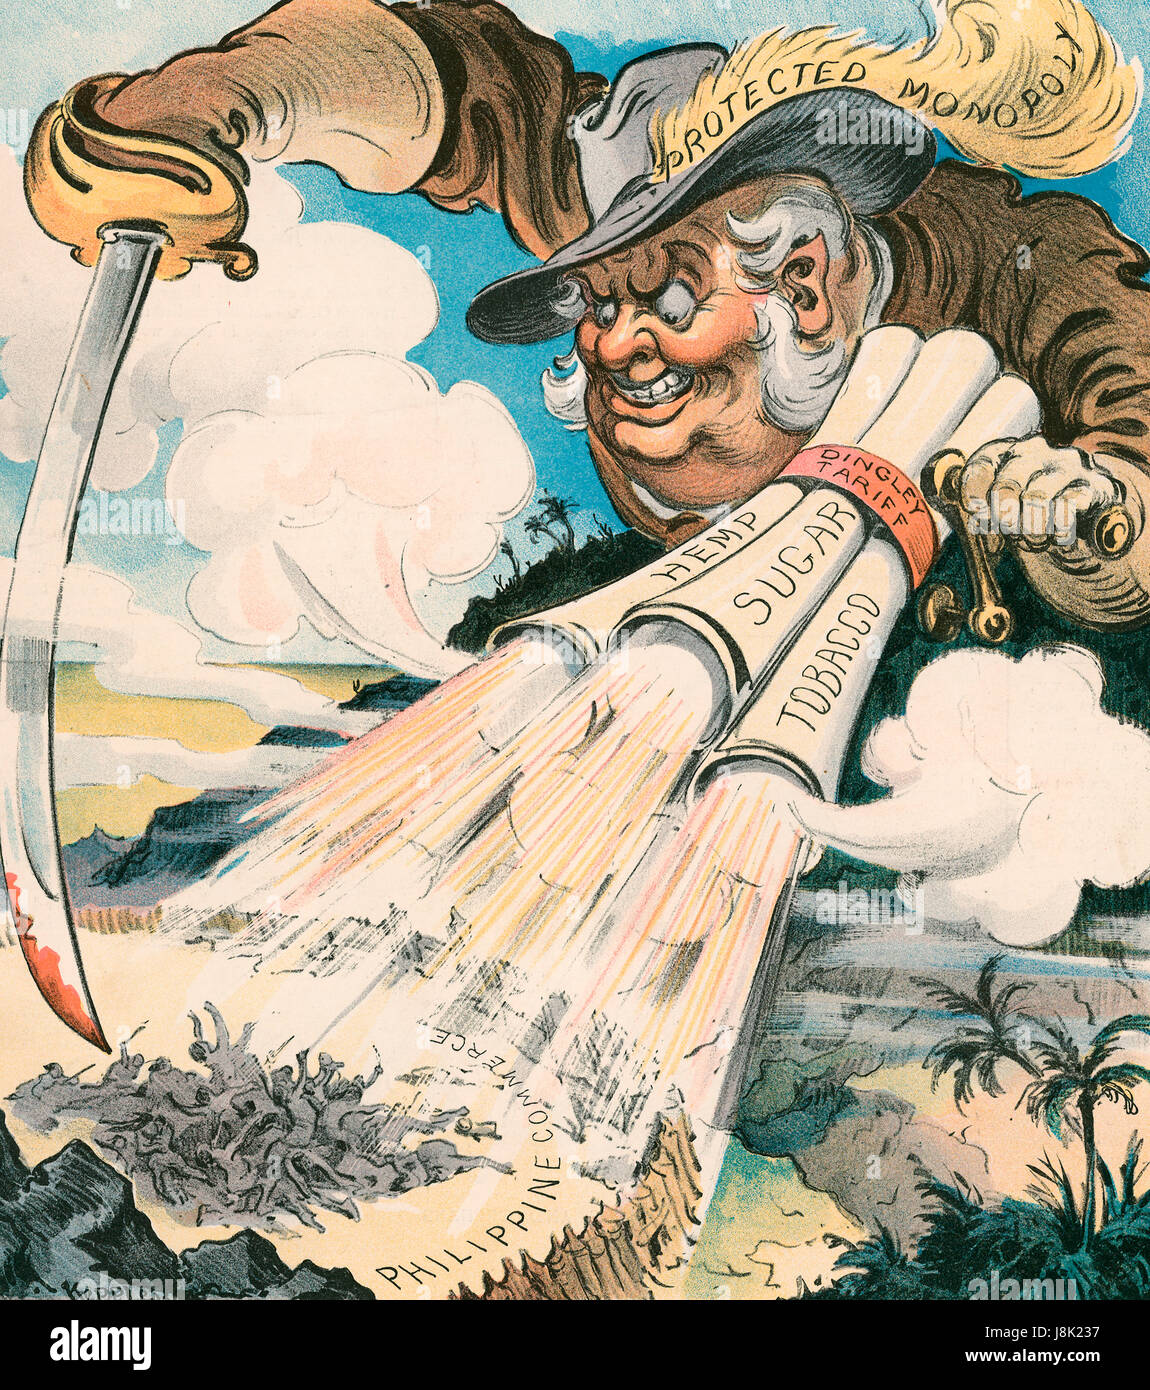 Upholding the honor of the American flag -  Illustration shows a mean, bloated figure labeled 'Protected Monopoly', dressed as a soldier, holding a large blood-tipped sword and firing a gatling gun labeled 'Dingley Tariff' with barrels labeled 'Hemp, Sugar, and Tobacco' slaughtering a group of Filipinos in a stockade labeled 'Philippine Commerce'. Political Cartoon, 1906 Stock Photo